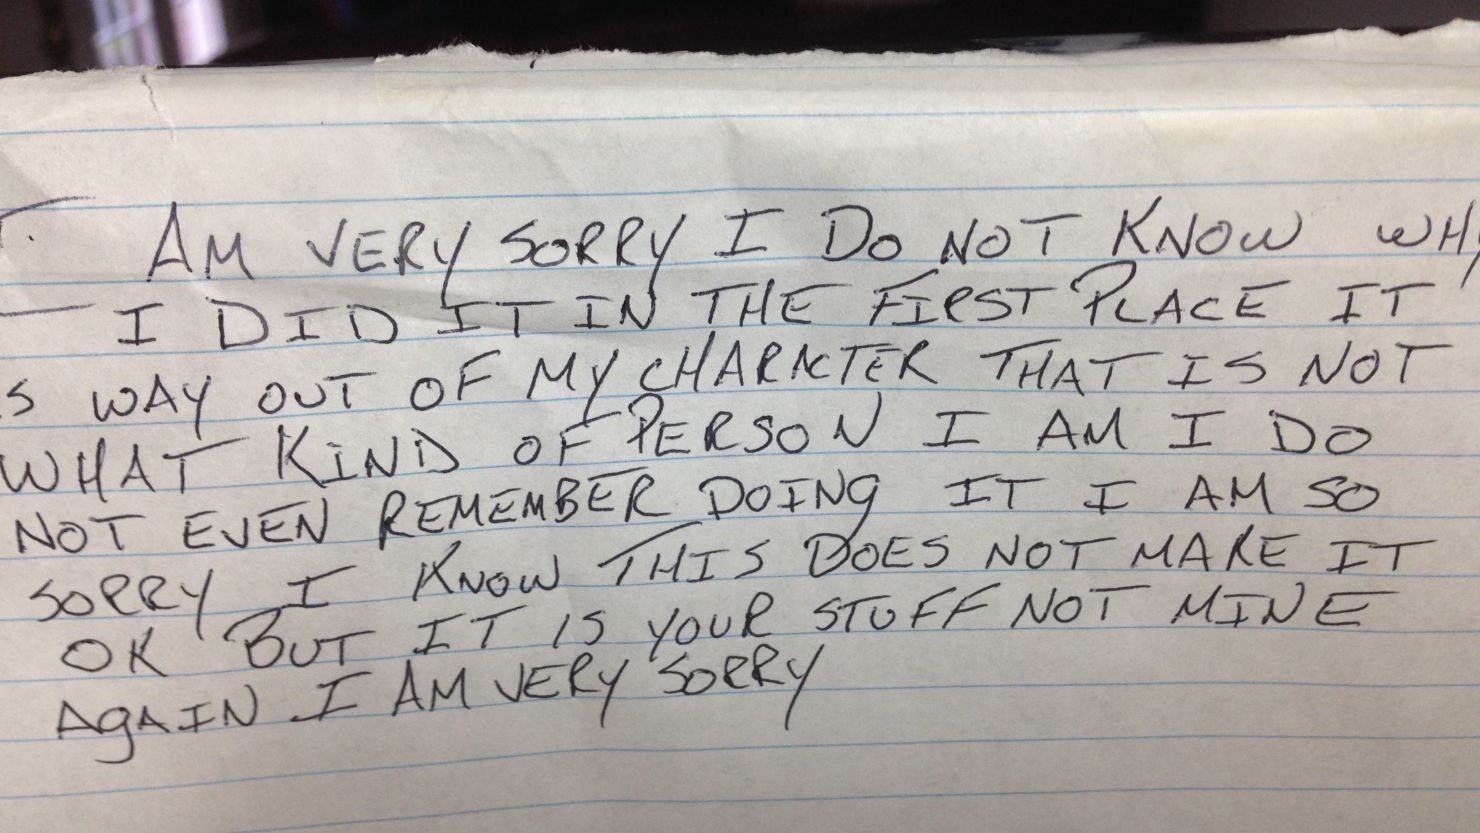 A thief returned items and left an apology note, said Kentucky authorities.